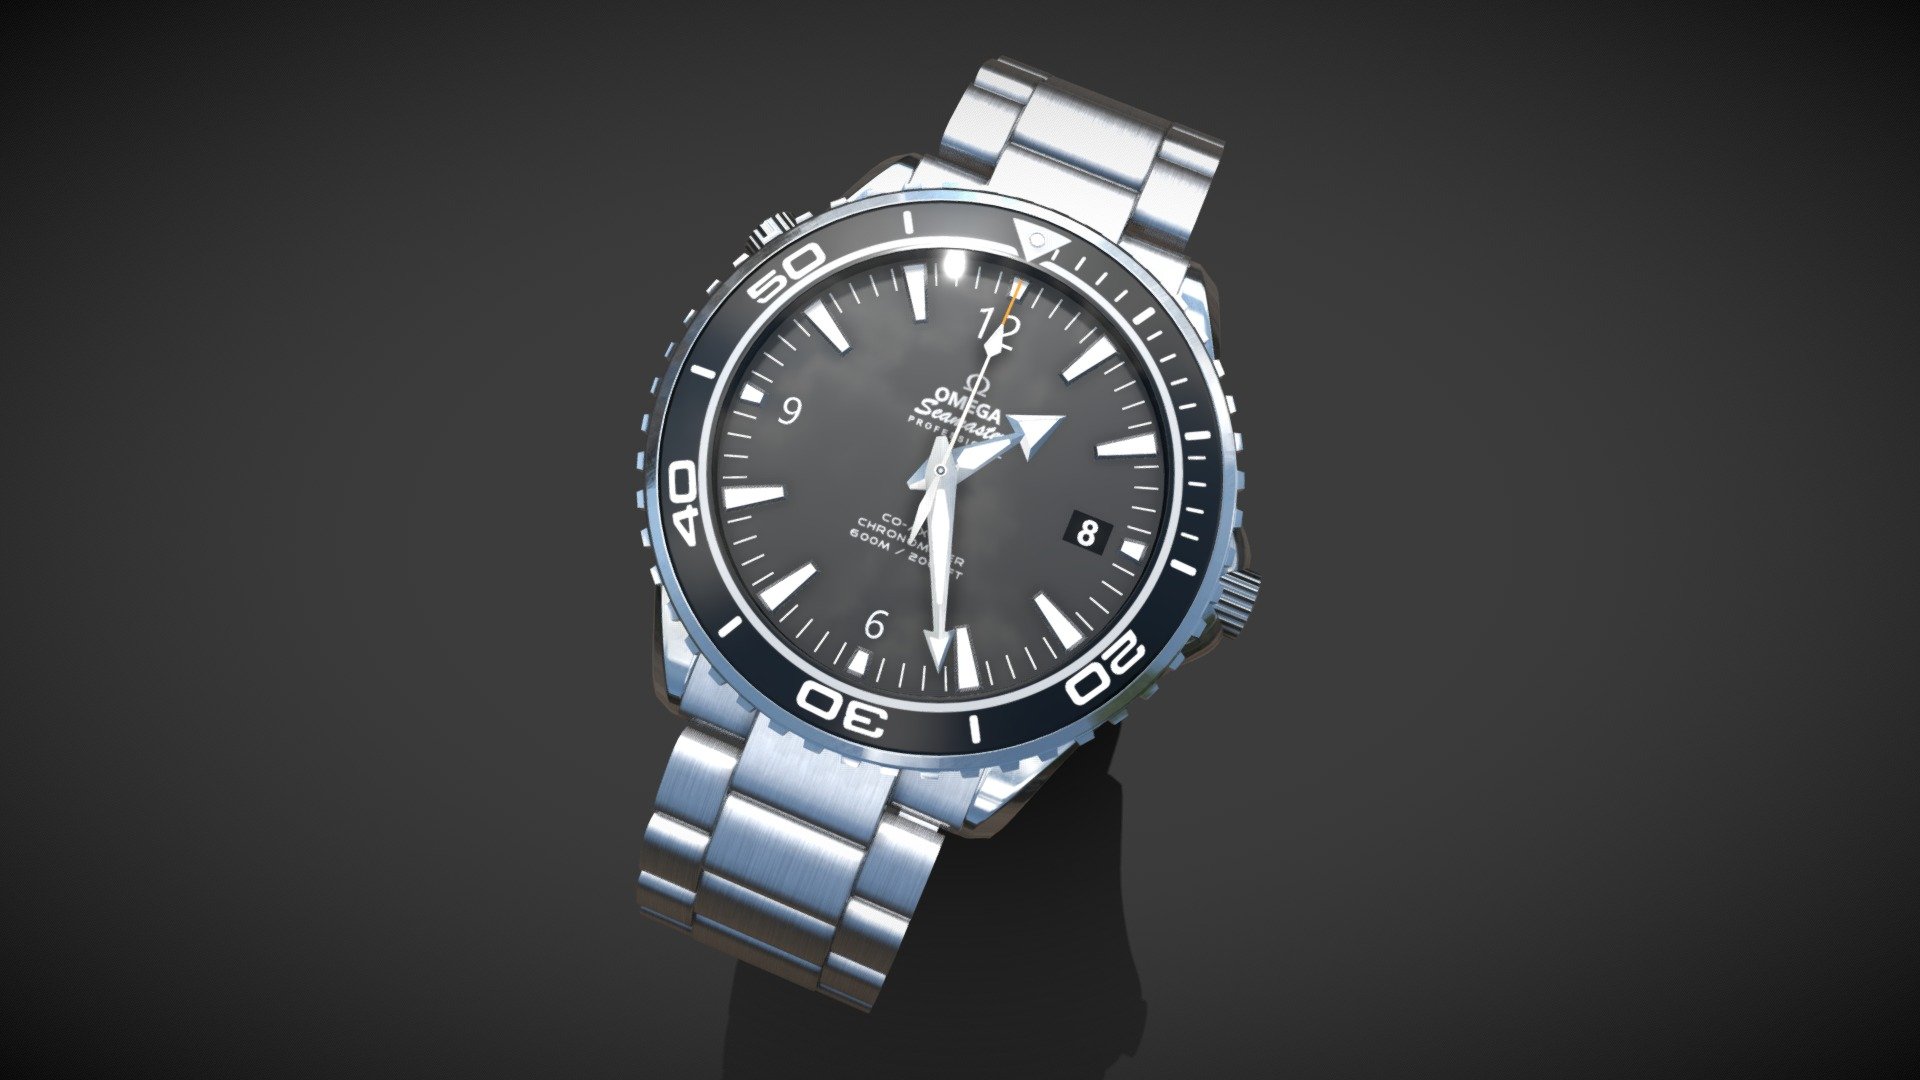 3D Model of the Omega Seamaster Planet Ocean. I made the 3D model from photos (without the blueprints), so there may be some small errors. If you are looking for an extremely accurate model, do not choose this one. However it will make a perfect illusion for movie/ video game/ etc. 

Most of the pieces can be subdivided, I wrote &ldquo;SUB